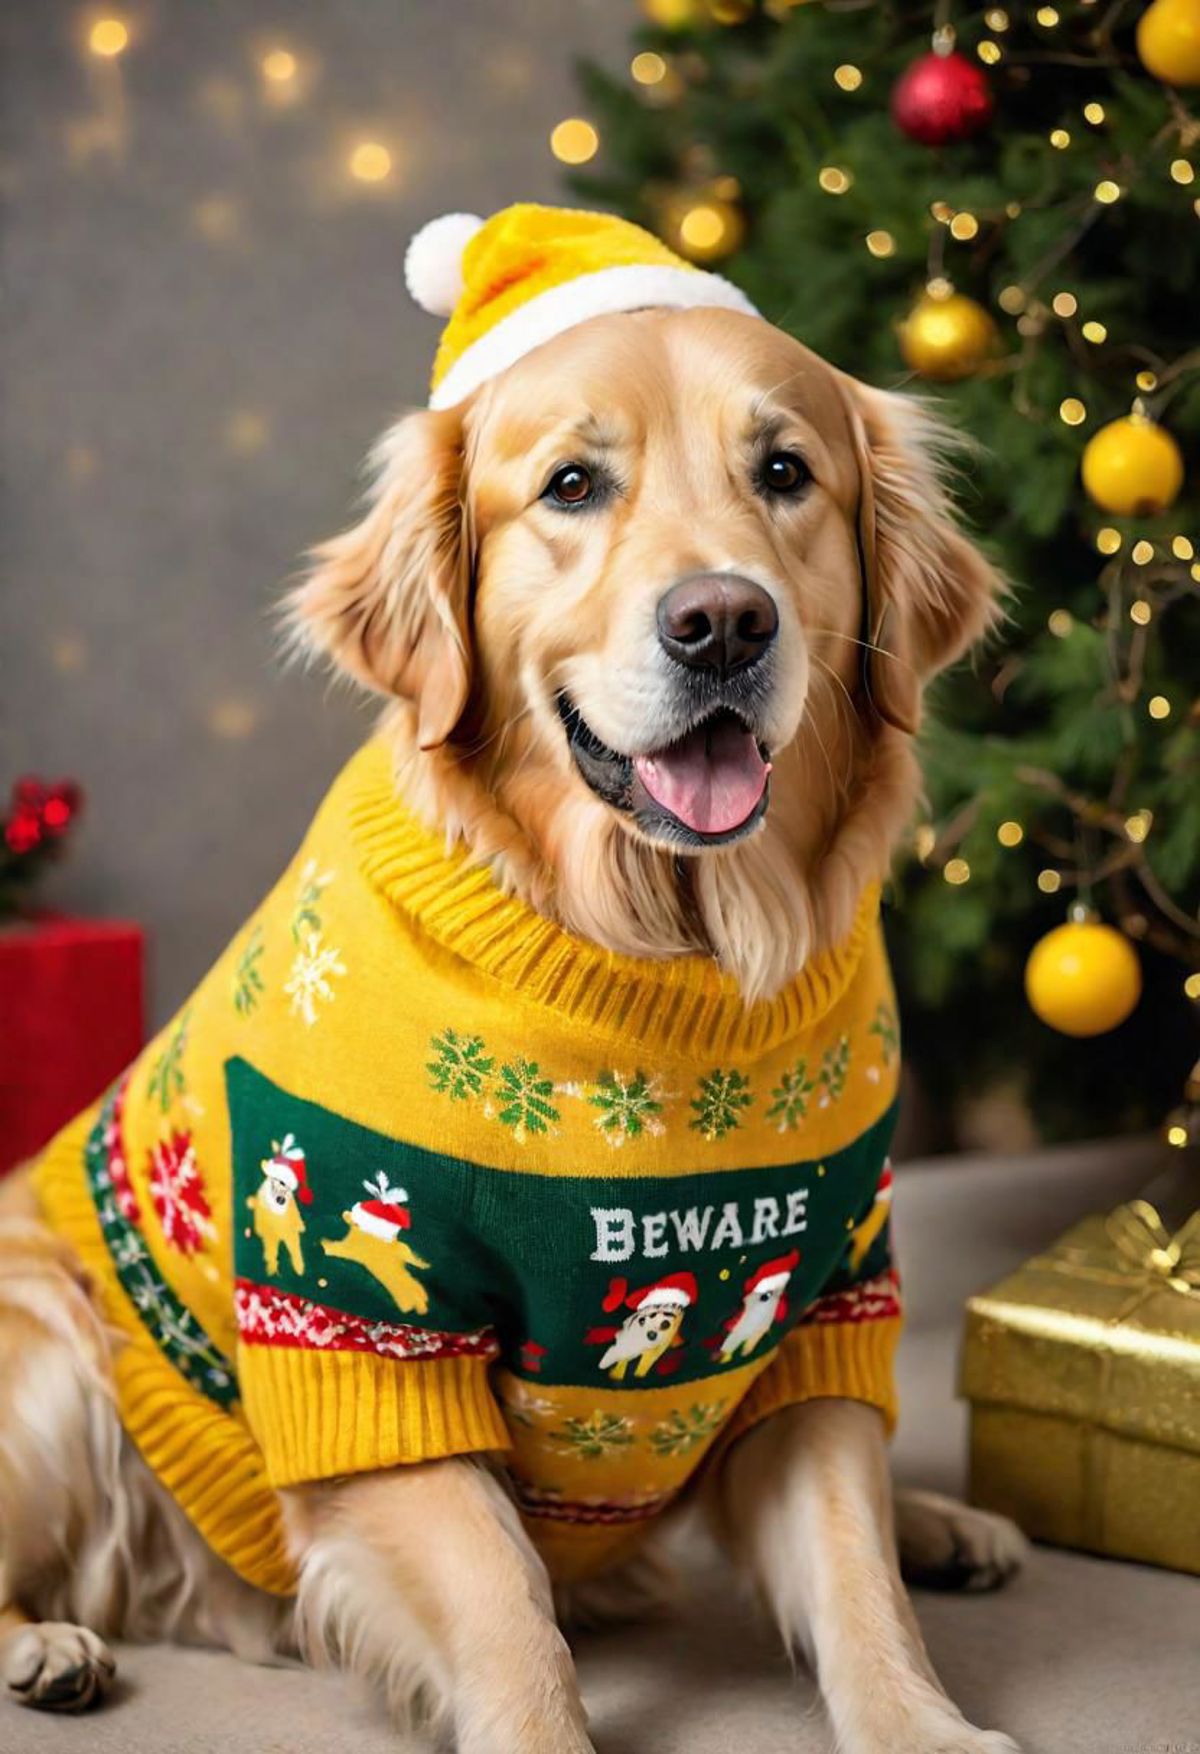 A cute dog wearing a knit sweater with a warning message sits in front of a Christmas tree.